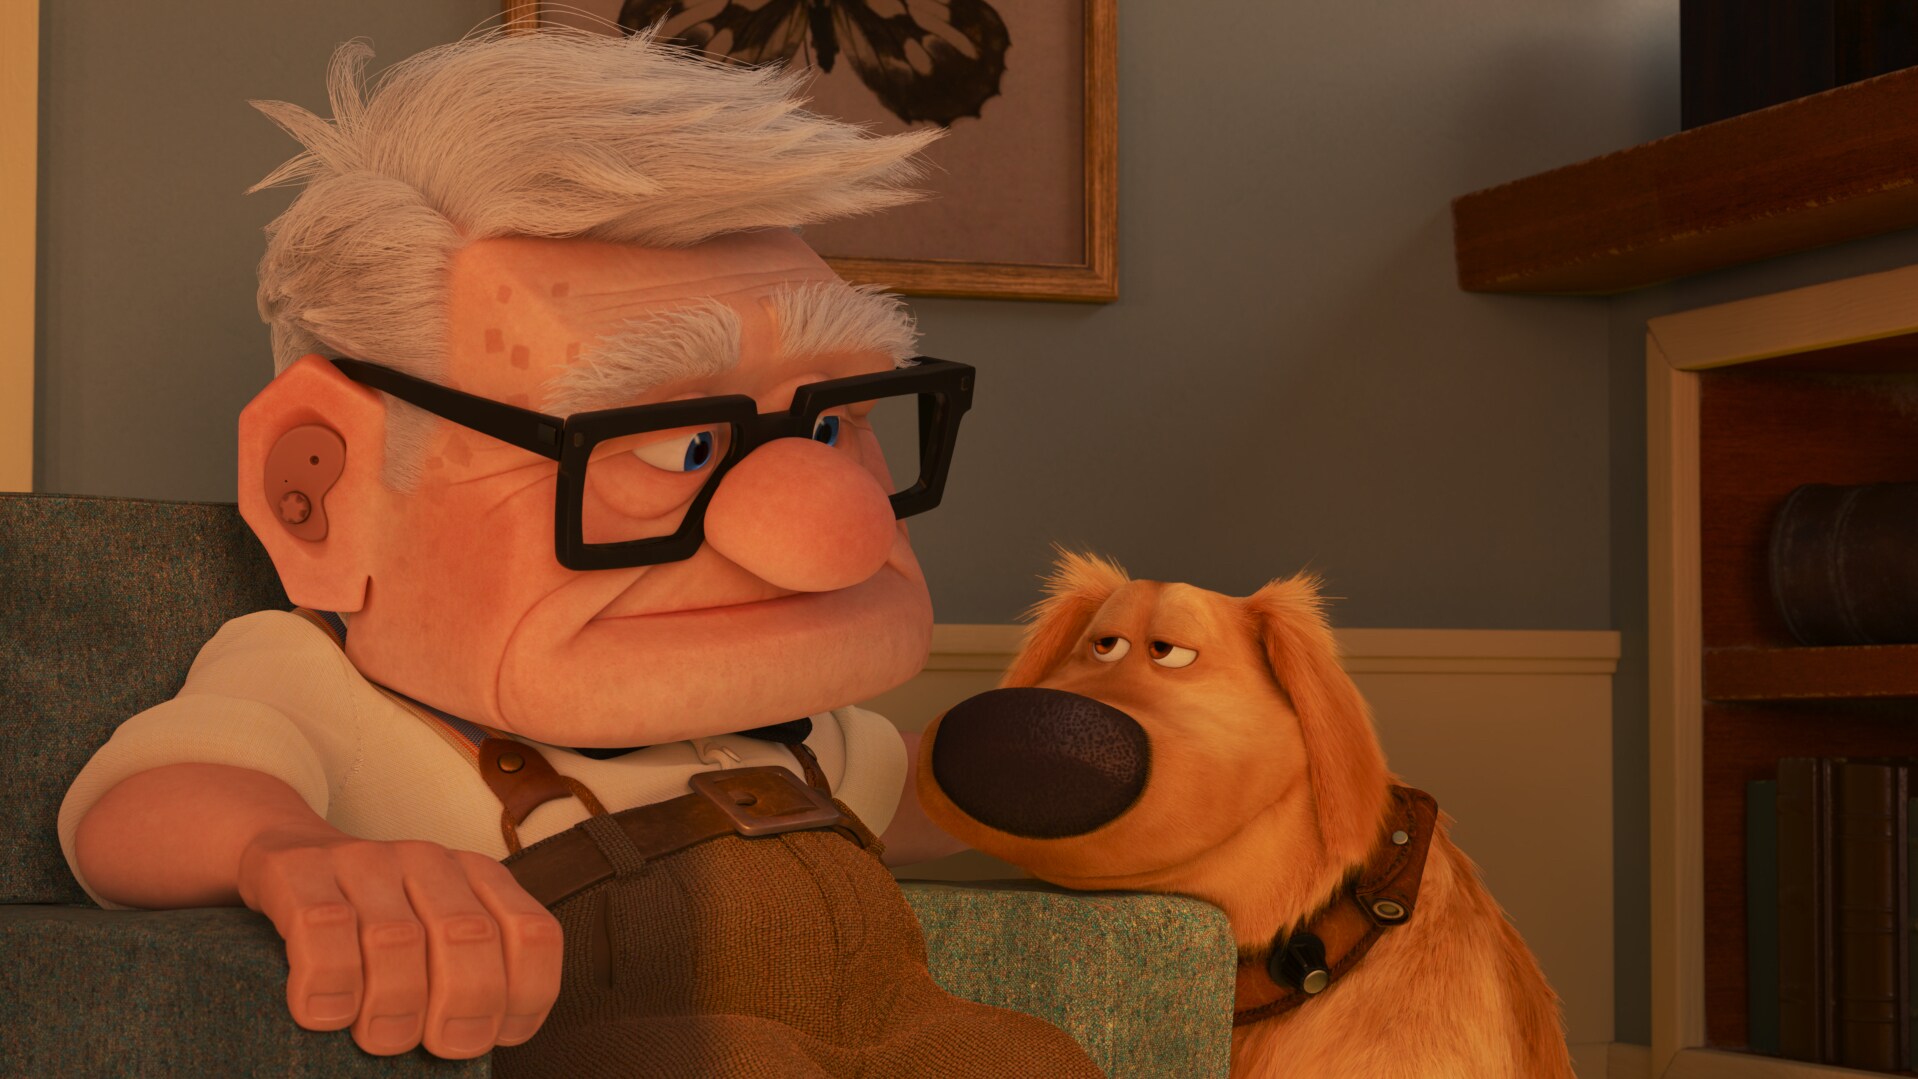 NEW ADVENTURES -- Pixar Animation Studios’ “Dug Days” is a new collection of shorts that follows the misadventures of Dug (voice of Bob Peterson), the lovable dog from Disney and Pixar’s “Up.” Each short features Dug and his official master aka “Papa,” Carl Fredricksen (voice of Ed Asner), as the talking dog navigates everyday events that occur in and around their backyard. Written and directed by Academy Award® nominee and Emmy® Award winner Bob Peterson and produced by Kim Collins, the shorts premiere exclusively on Disney+ on Sept. 1, 2021. © 2021 Disney/Pixar. All Rights Reserved.